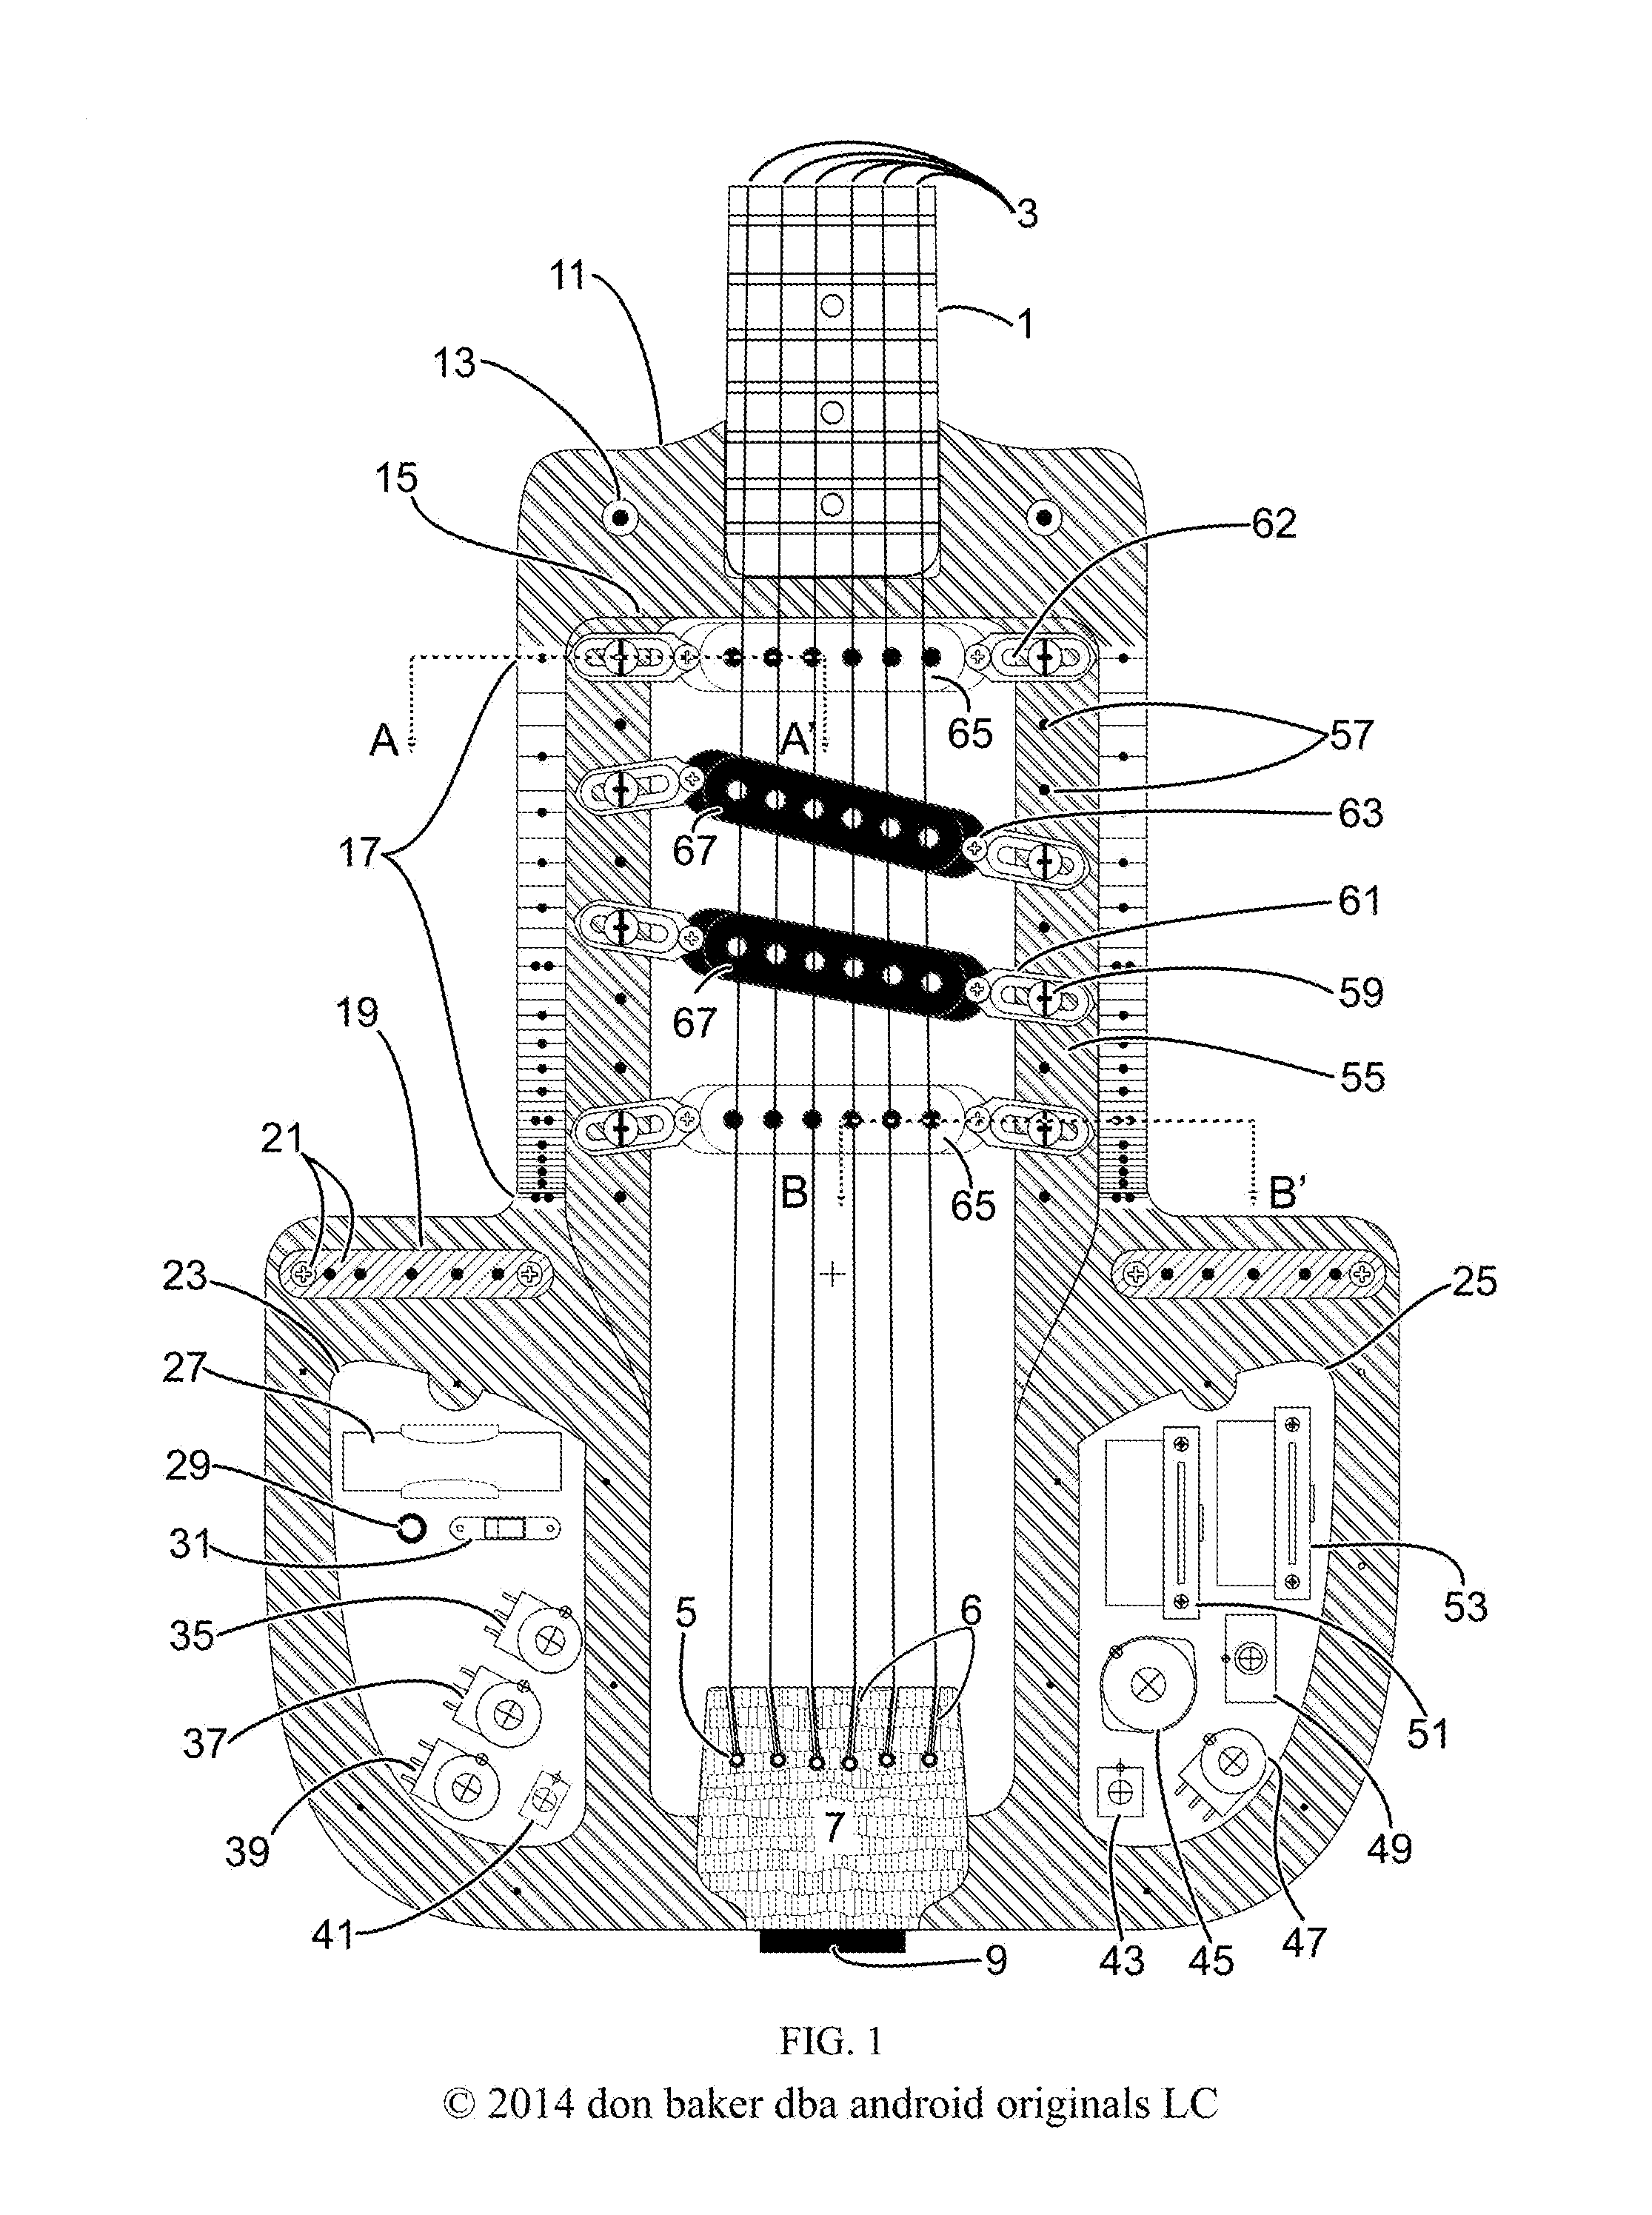 Acoustic-electric stringed instrument with improved body, electric pickup placement, pickup switching and electronic circuit